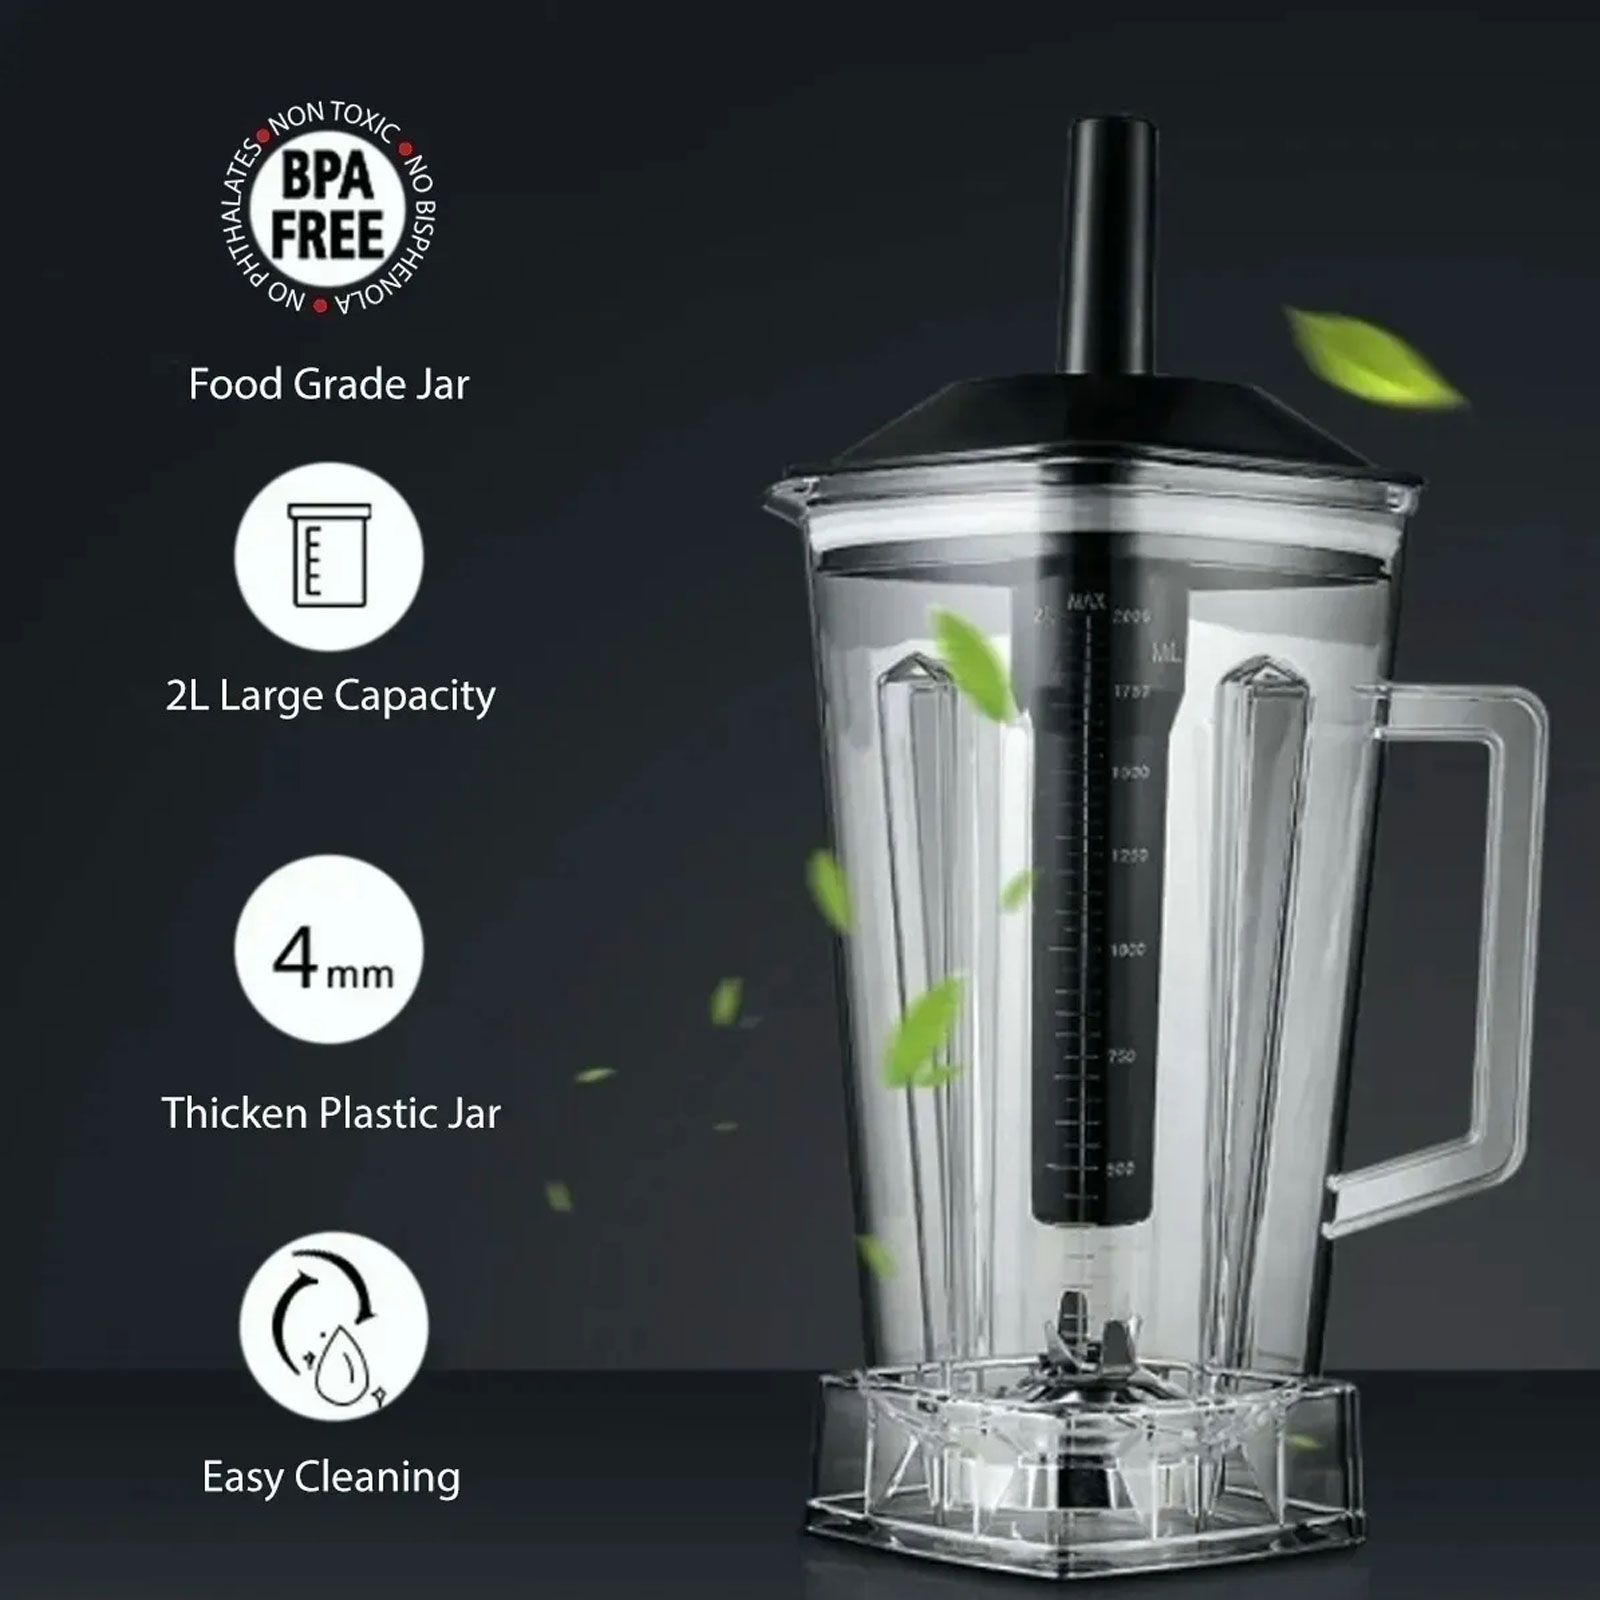 4500w High Power Fruit Commercial Smoothie Blender Professional Food  Processor - Buy 4500w High Power Fruit Commercial Smoothie Blender Professional  Food Processor Product on